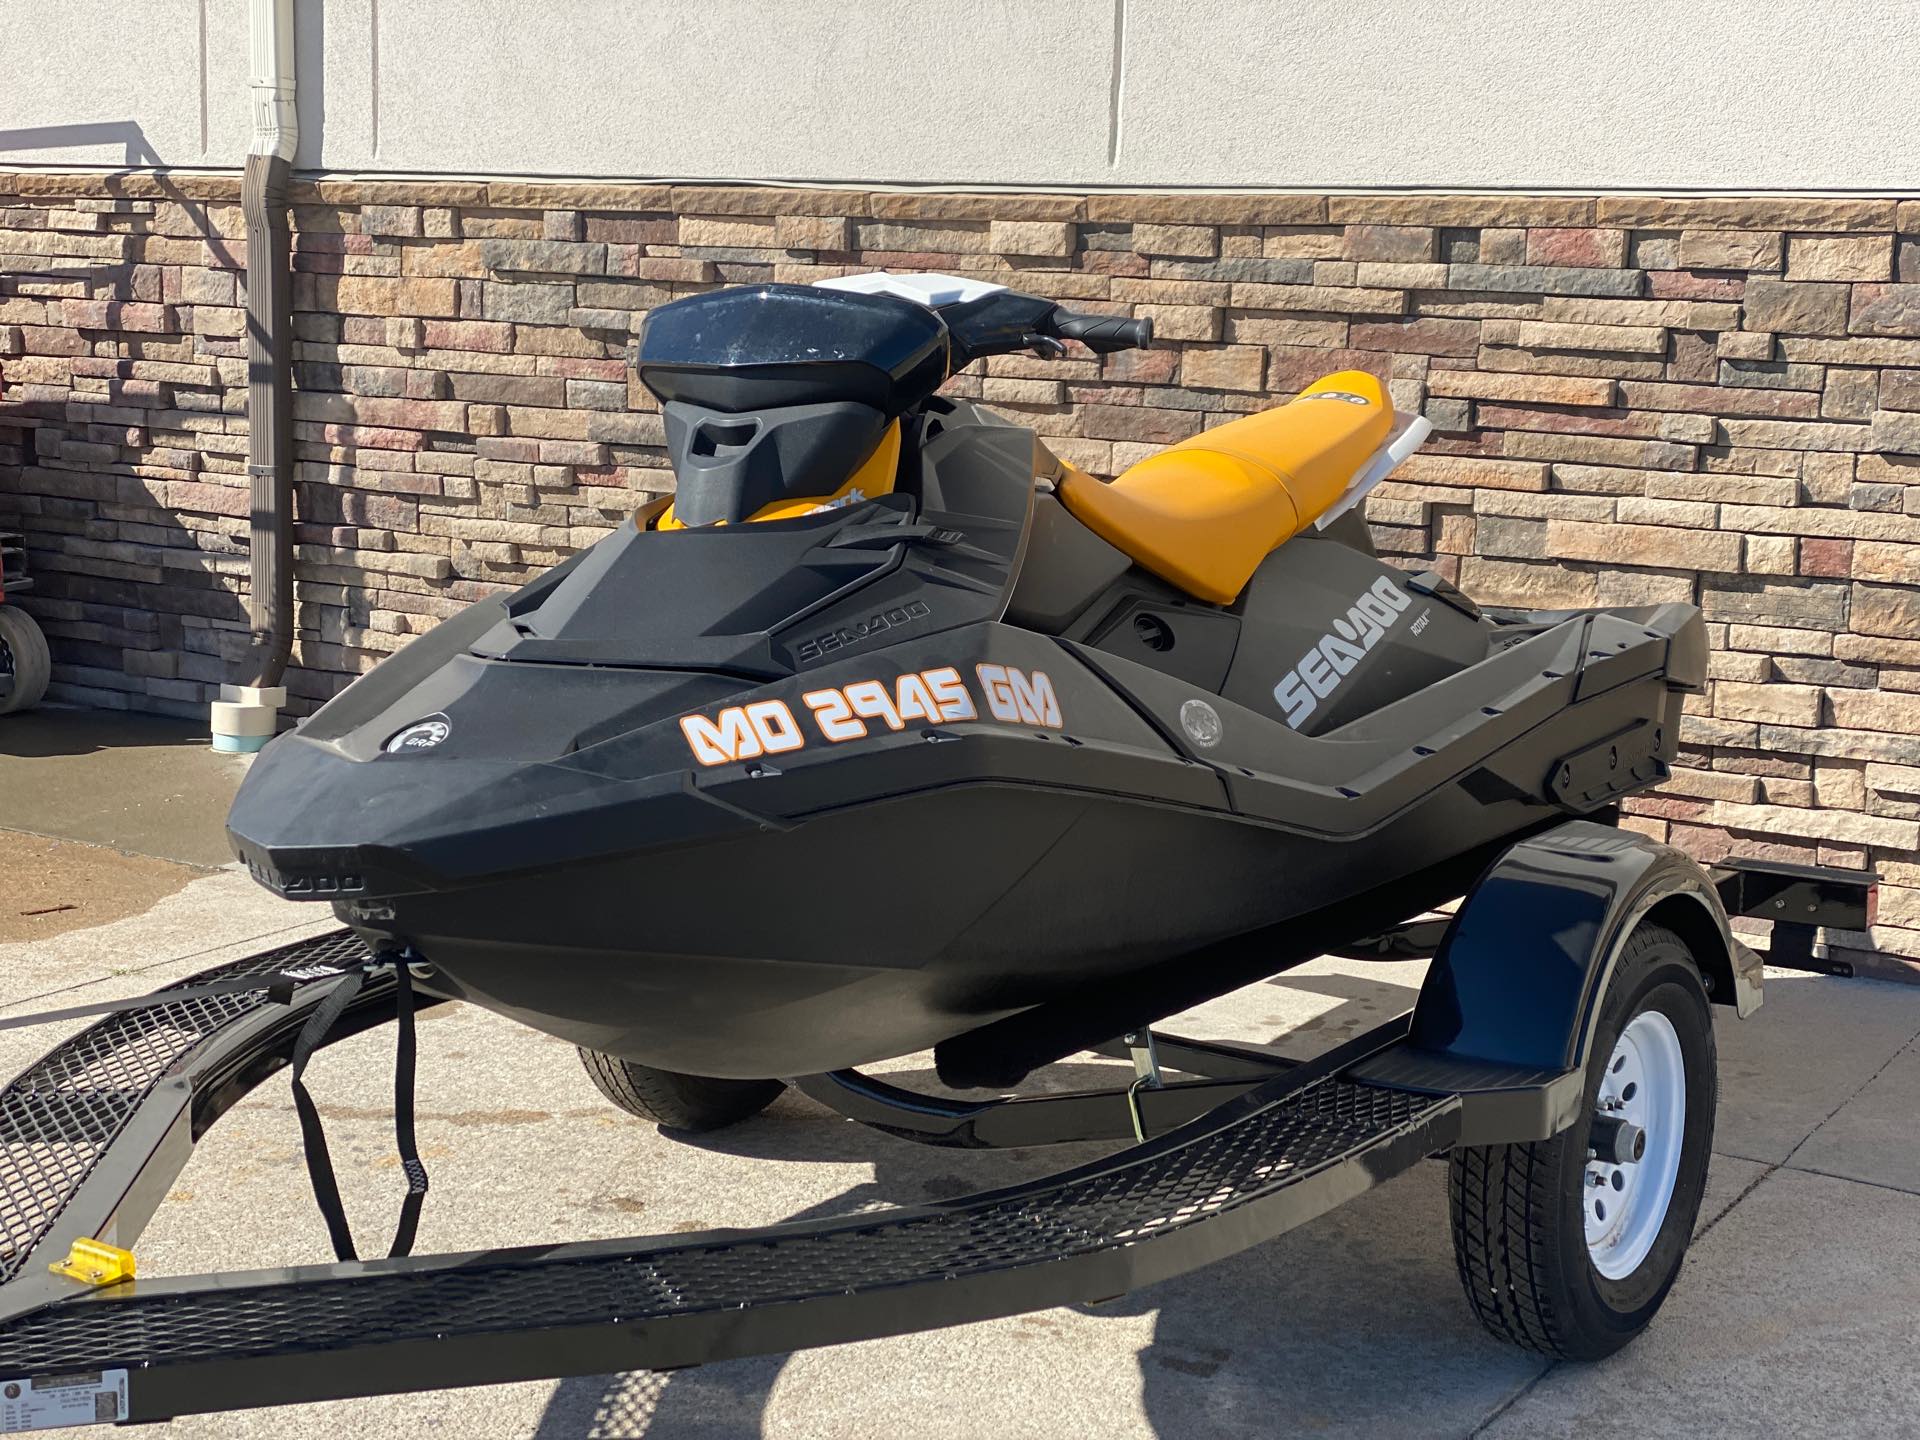 2021 Sea-Doo Spark 3-Up Rotax 900 ACE - 90 iBR + CONVENIENCE PACKAGE at Head Indian Motorcycle